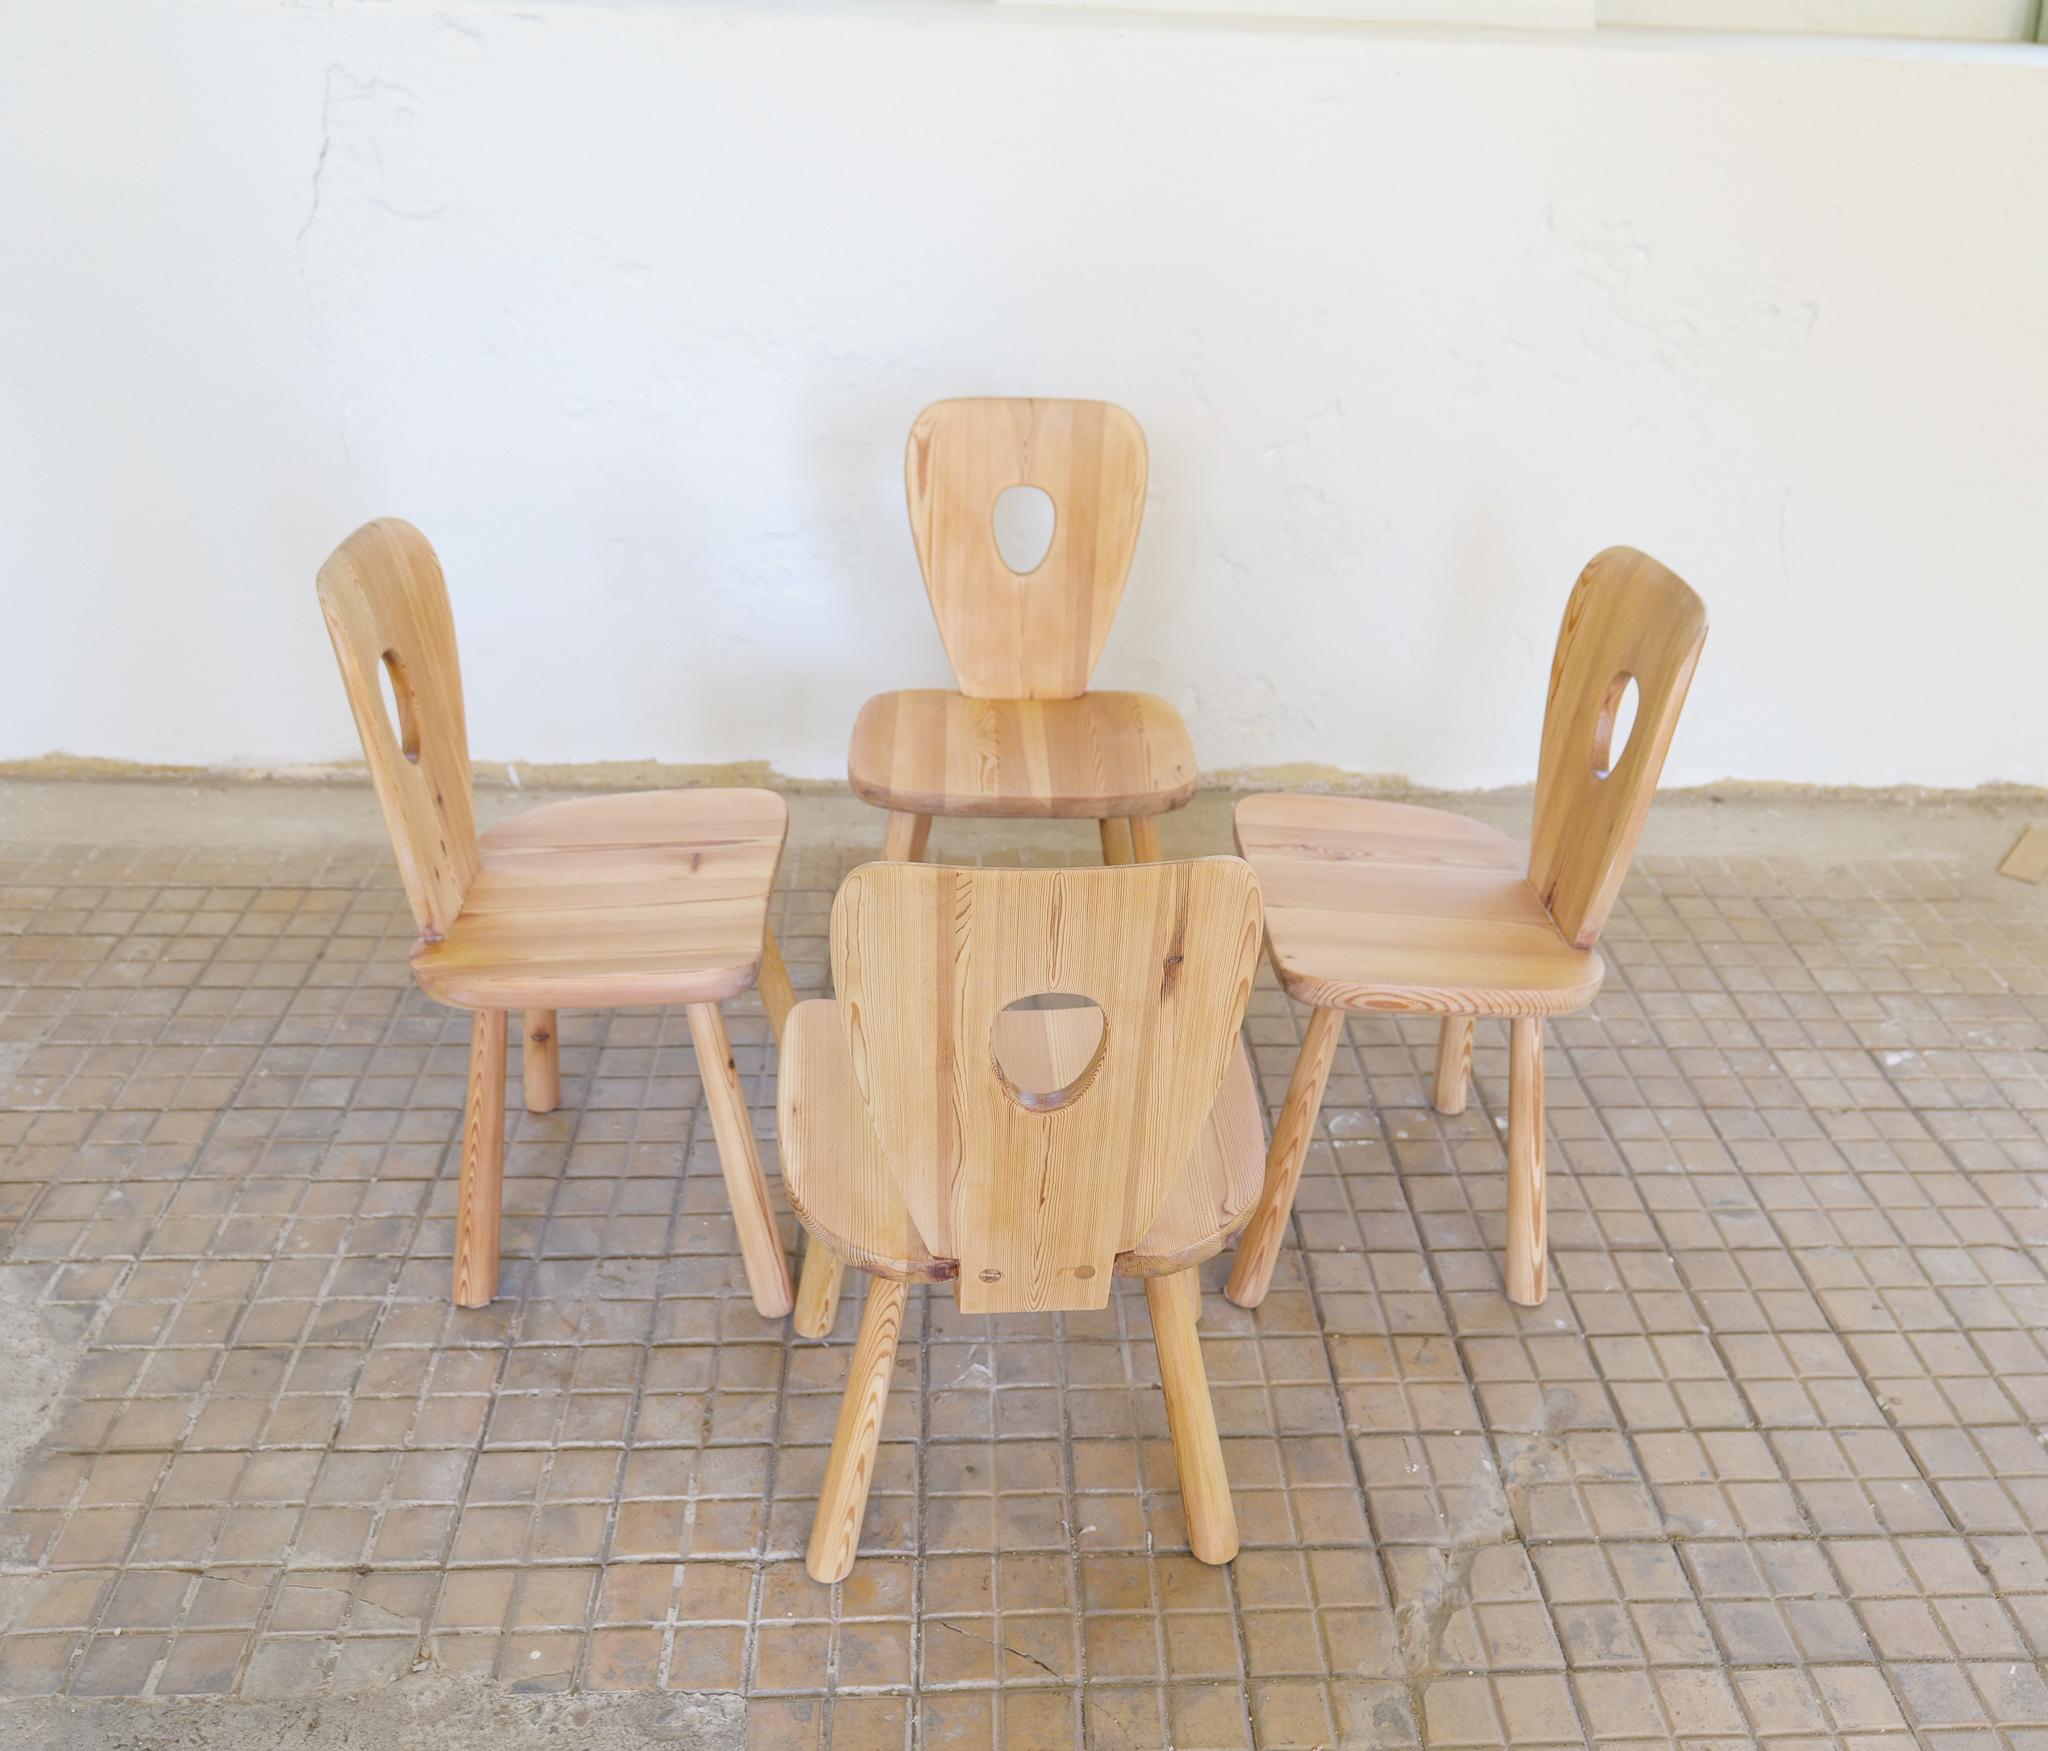 Swedish Sculptural Dining Chairs in Pine Bo Fjaestad, Sweden 1930s For Sale 4